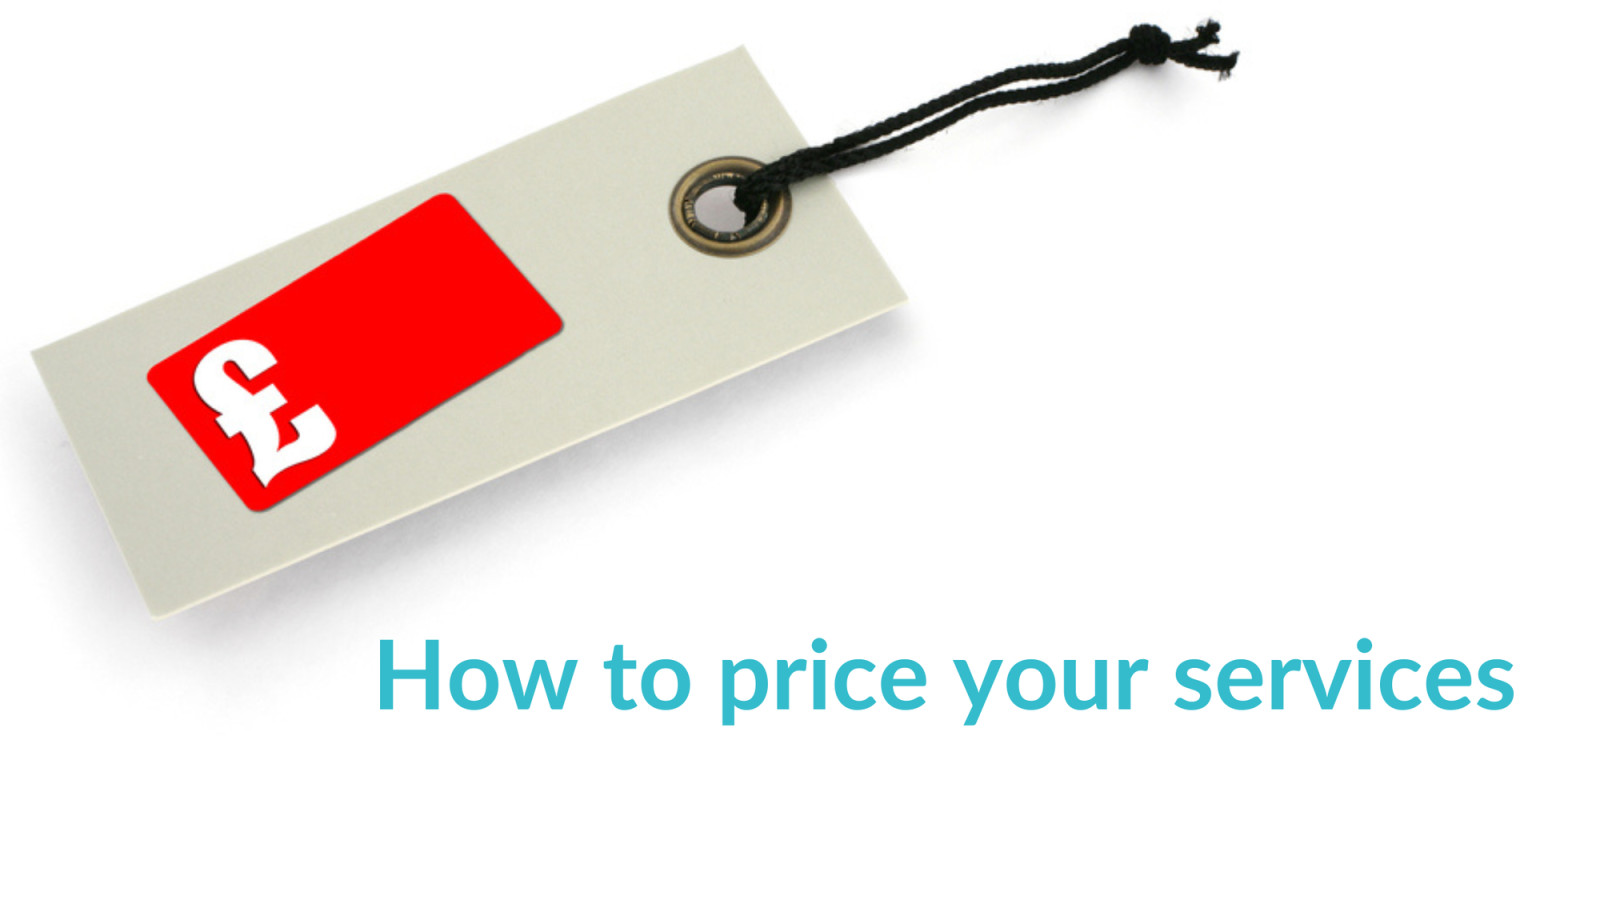 Pricing Your Services: Start as you mean to carry on